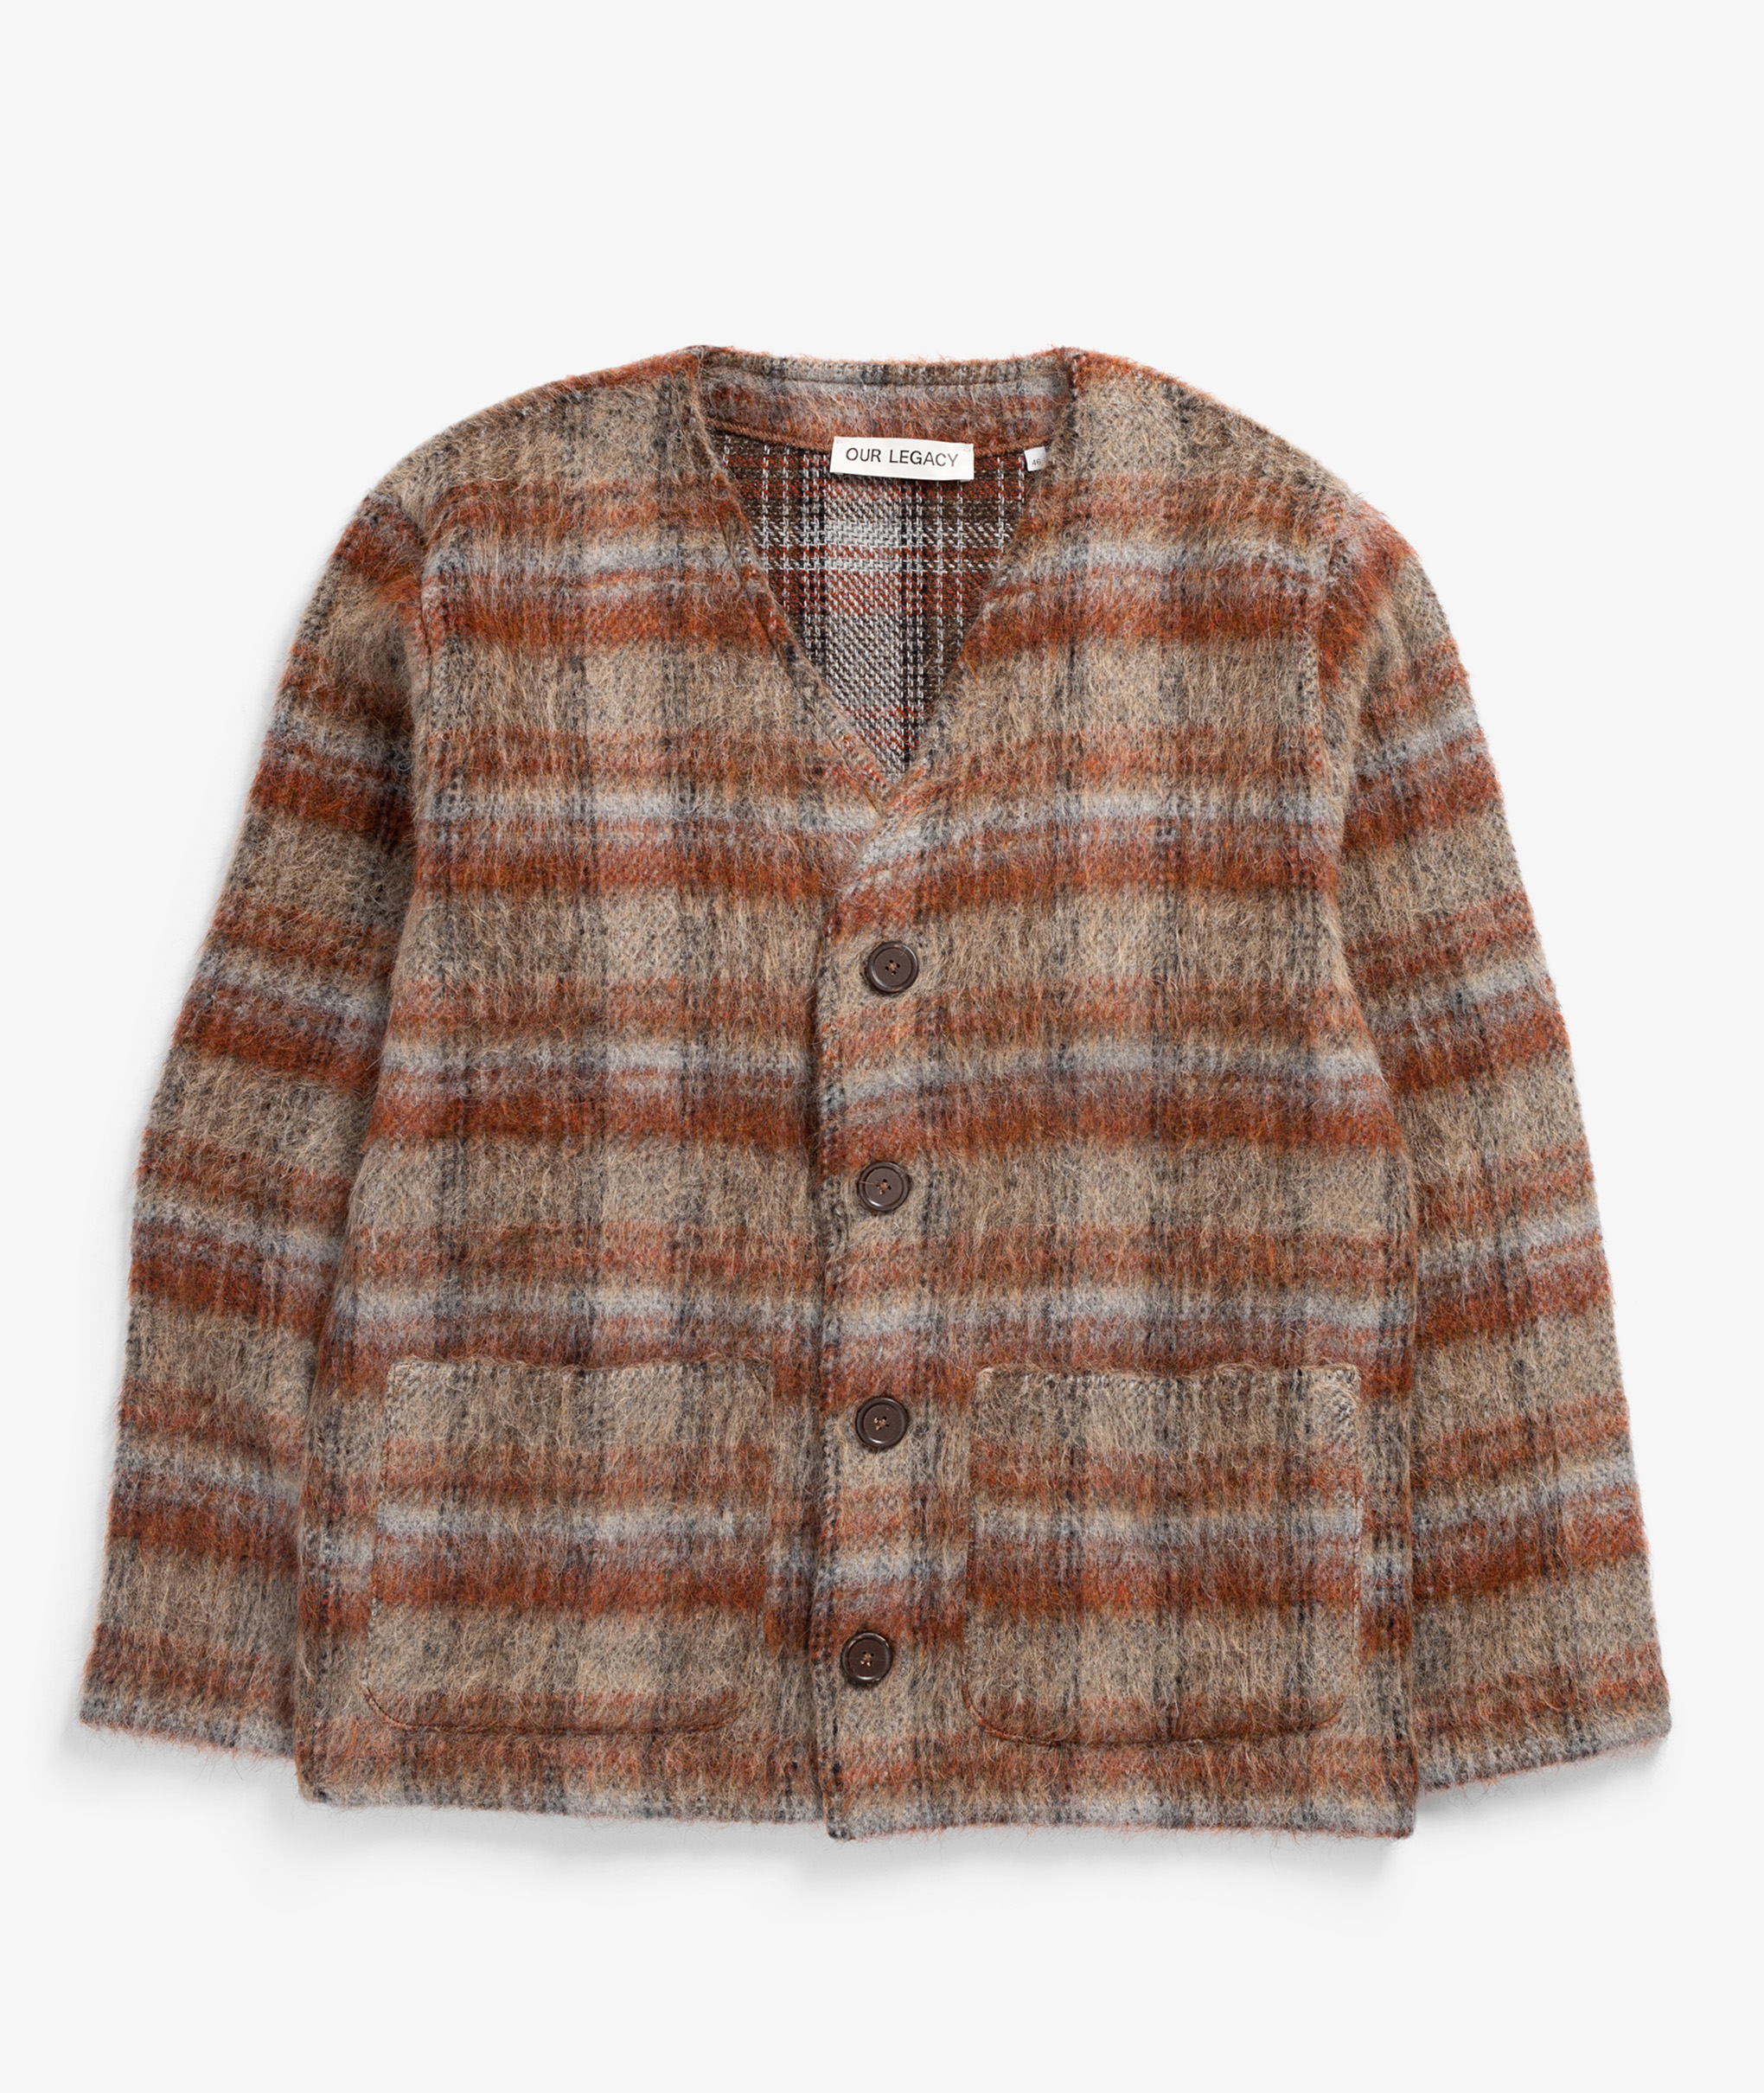 OUR LEGACY AMENT CHECK MOHAIR CARDIGAN-